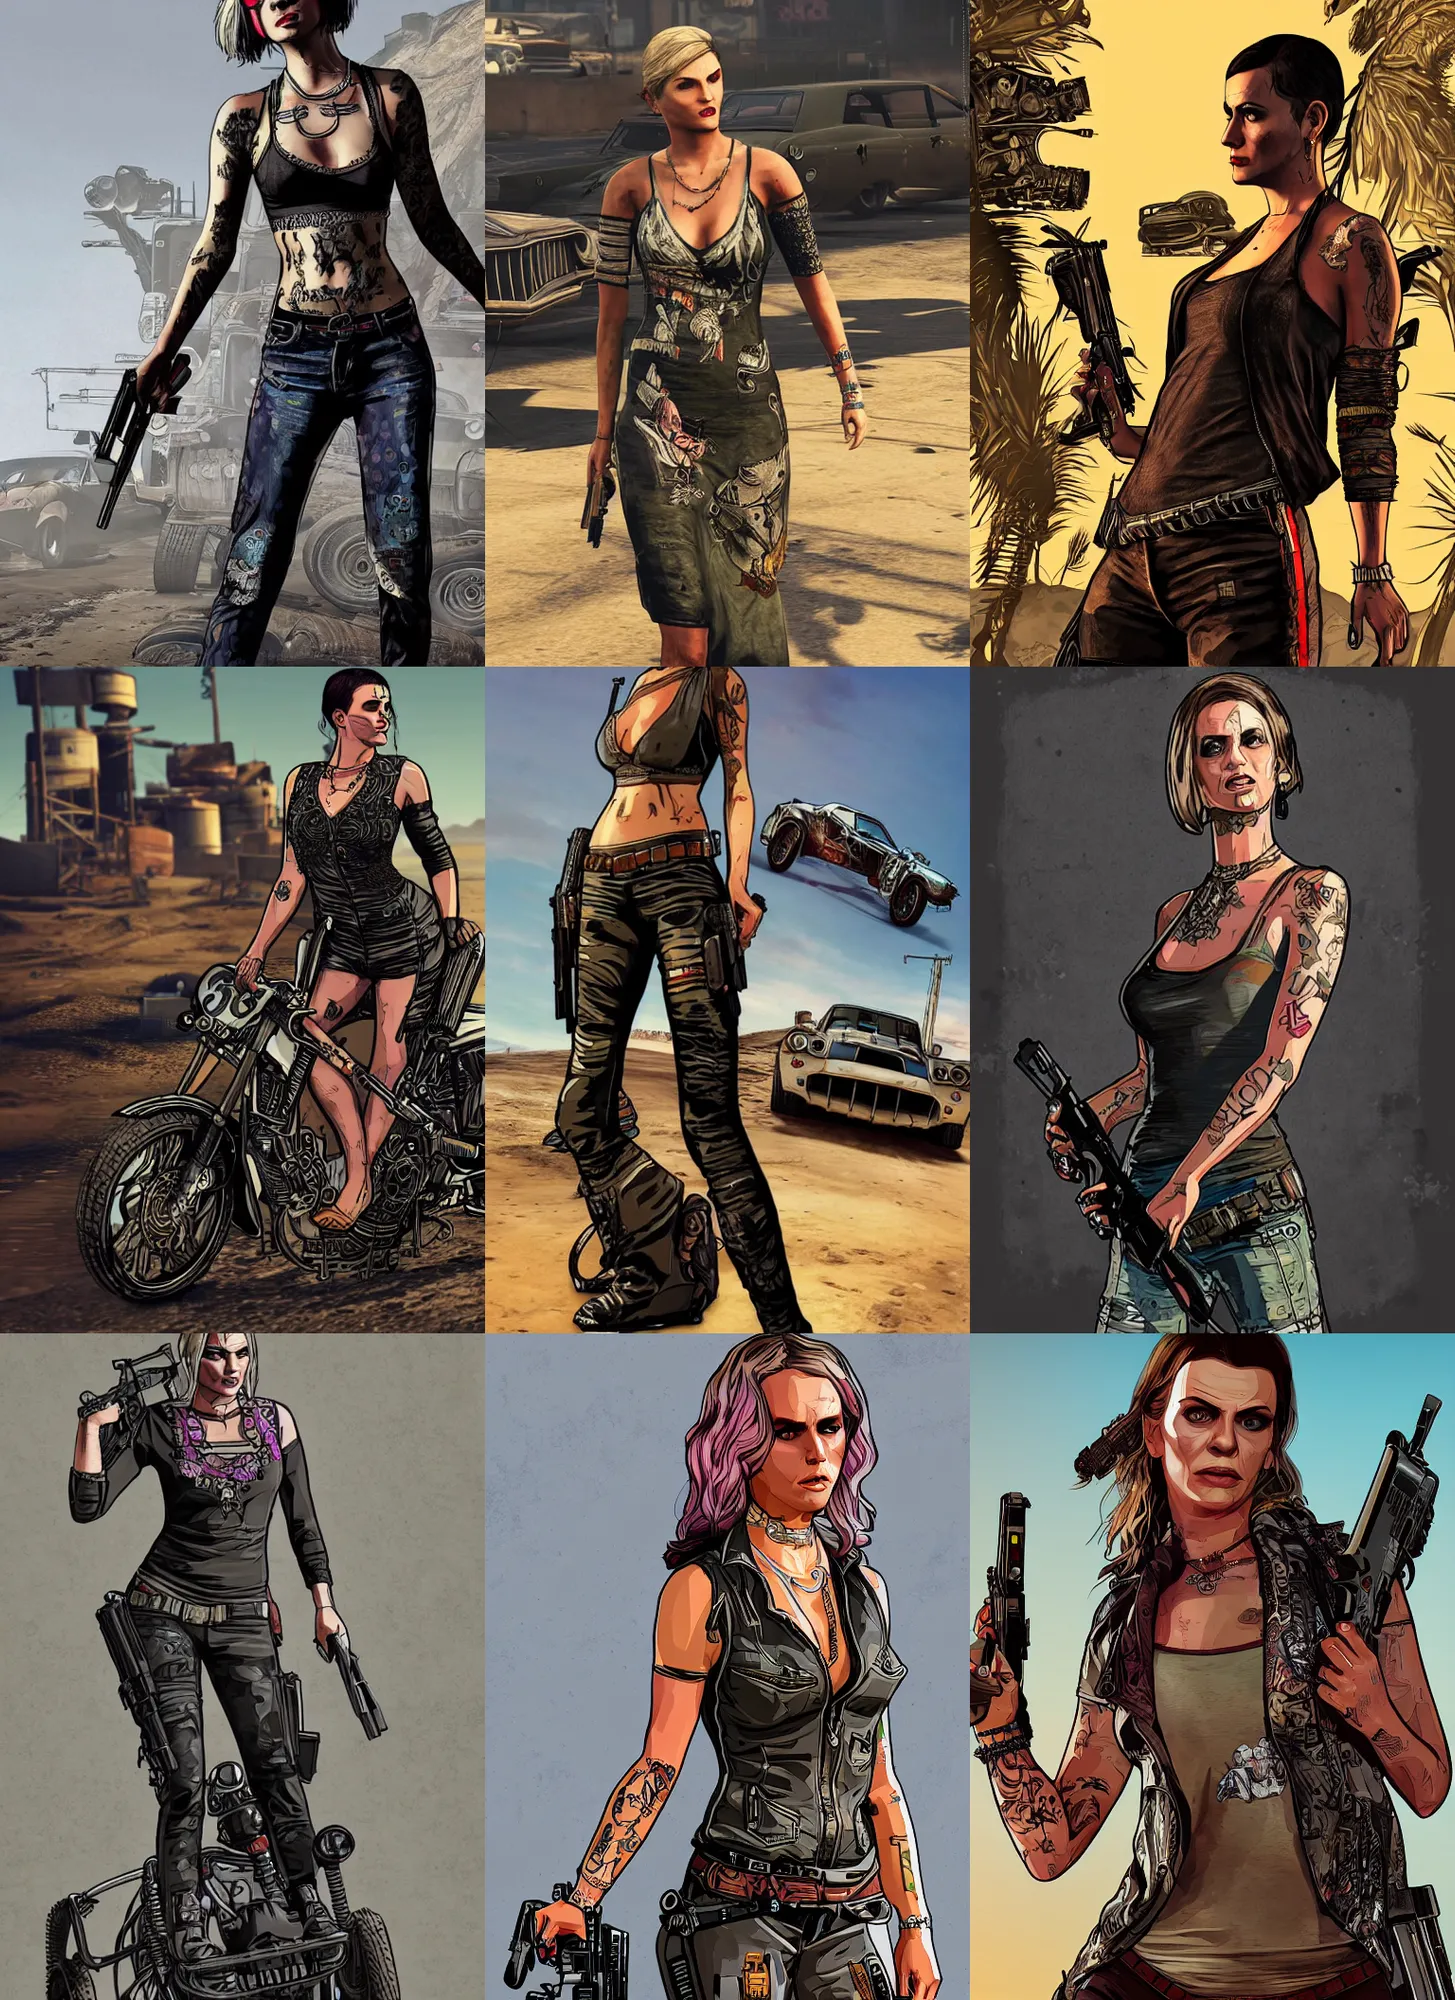 Prompt: gta 5, full body concept, mad max female wearing intricate clothing, digital illustration in the style of a gta v cover